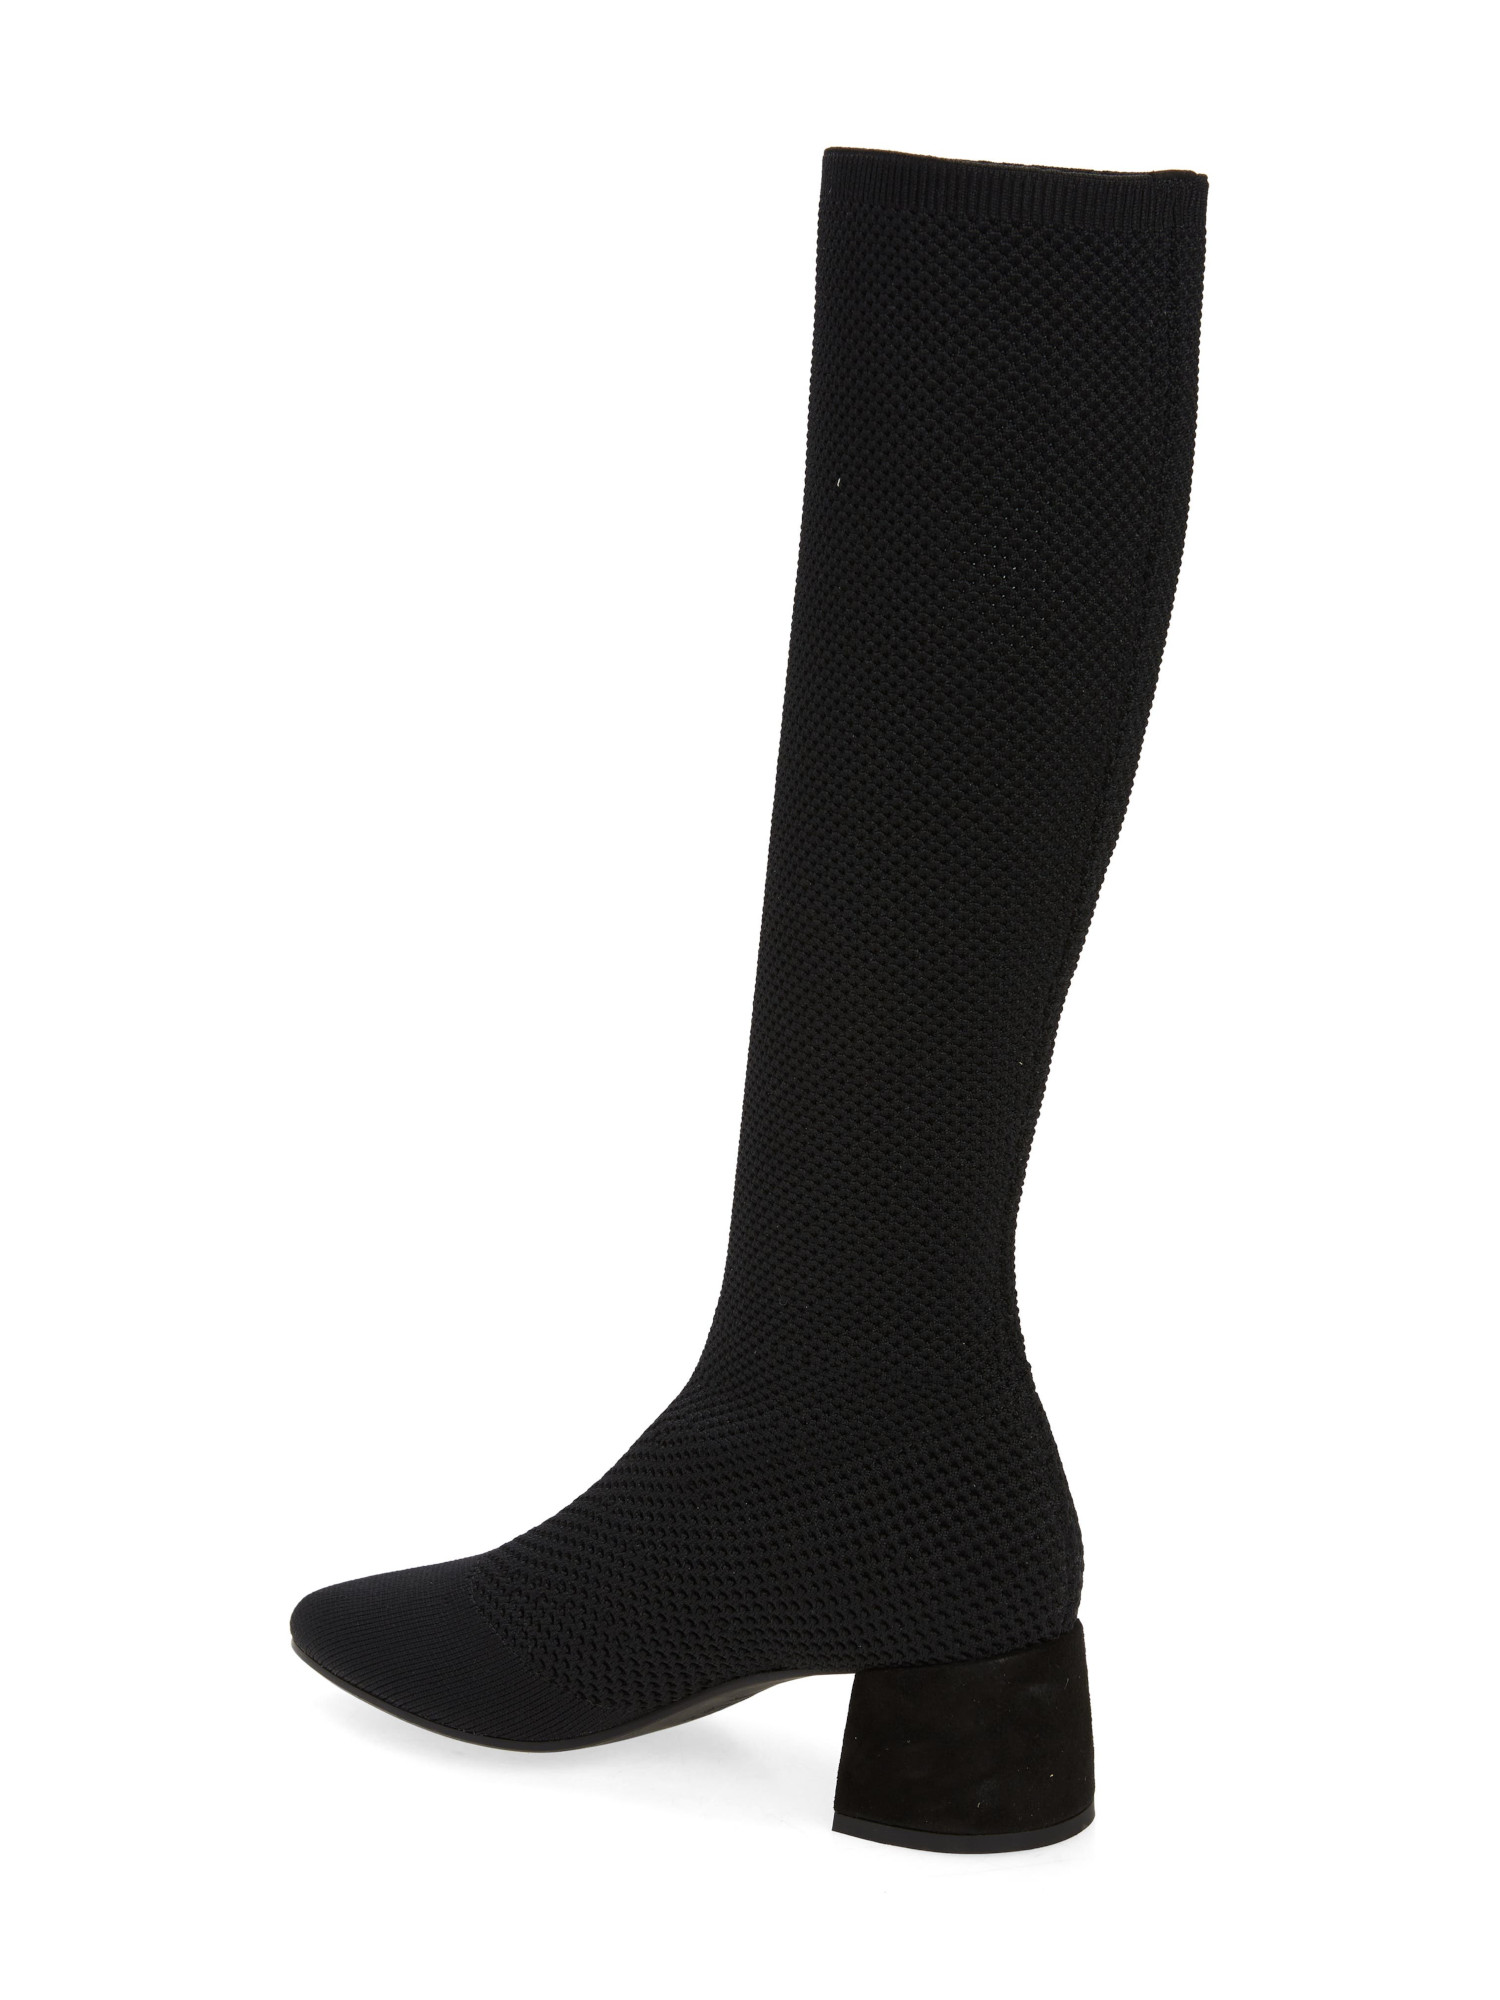 EILEEN FISHER Womens Black Knit Stretch Padded Innis Pointed Toe Dress Boots Shoes 8.5 M